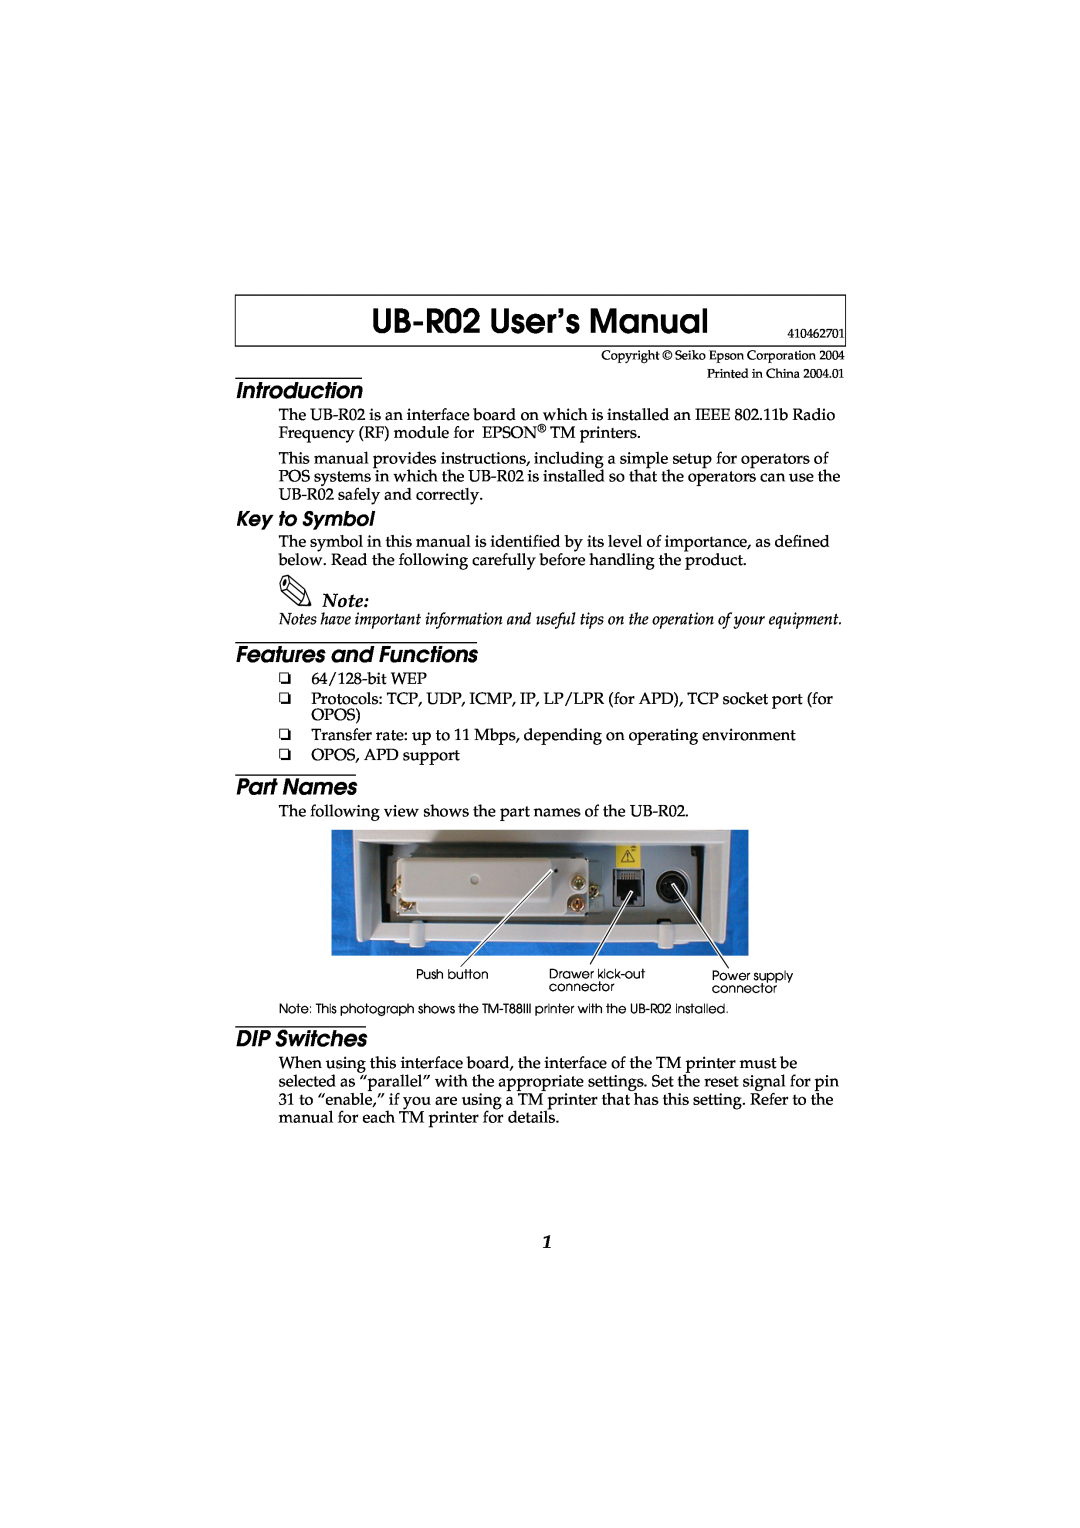 Seiko Group UB-R02 user manual Introduction, Features and Functions, Part Names, DIP Switches, Key to Symbol 